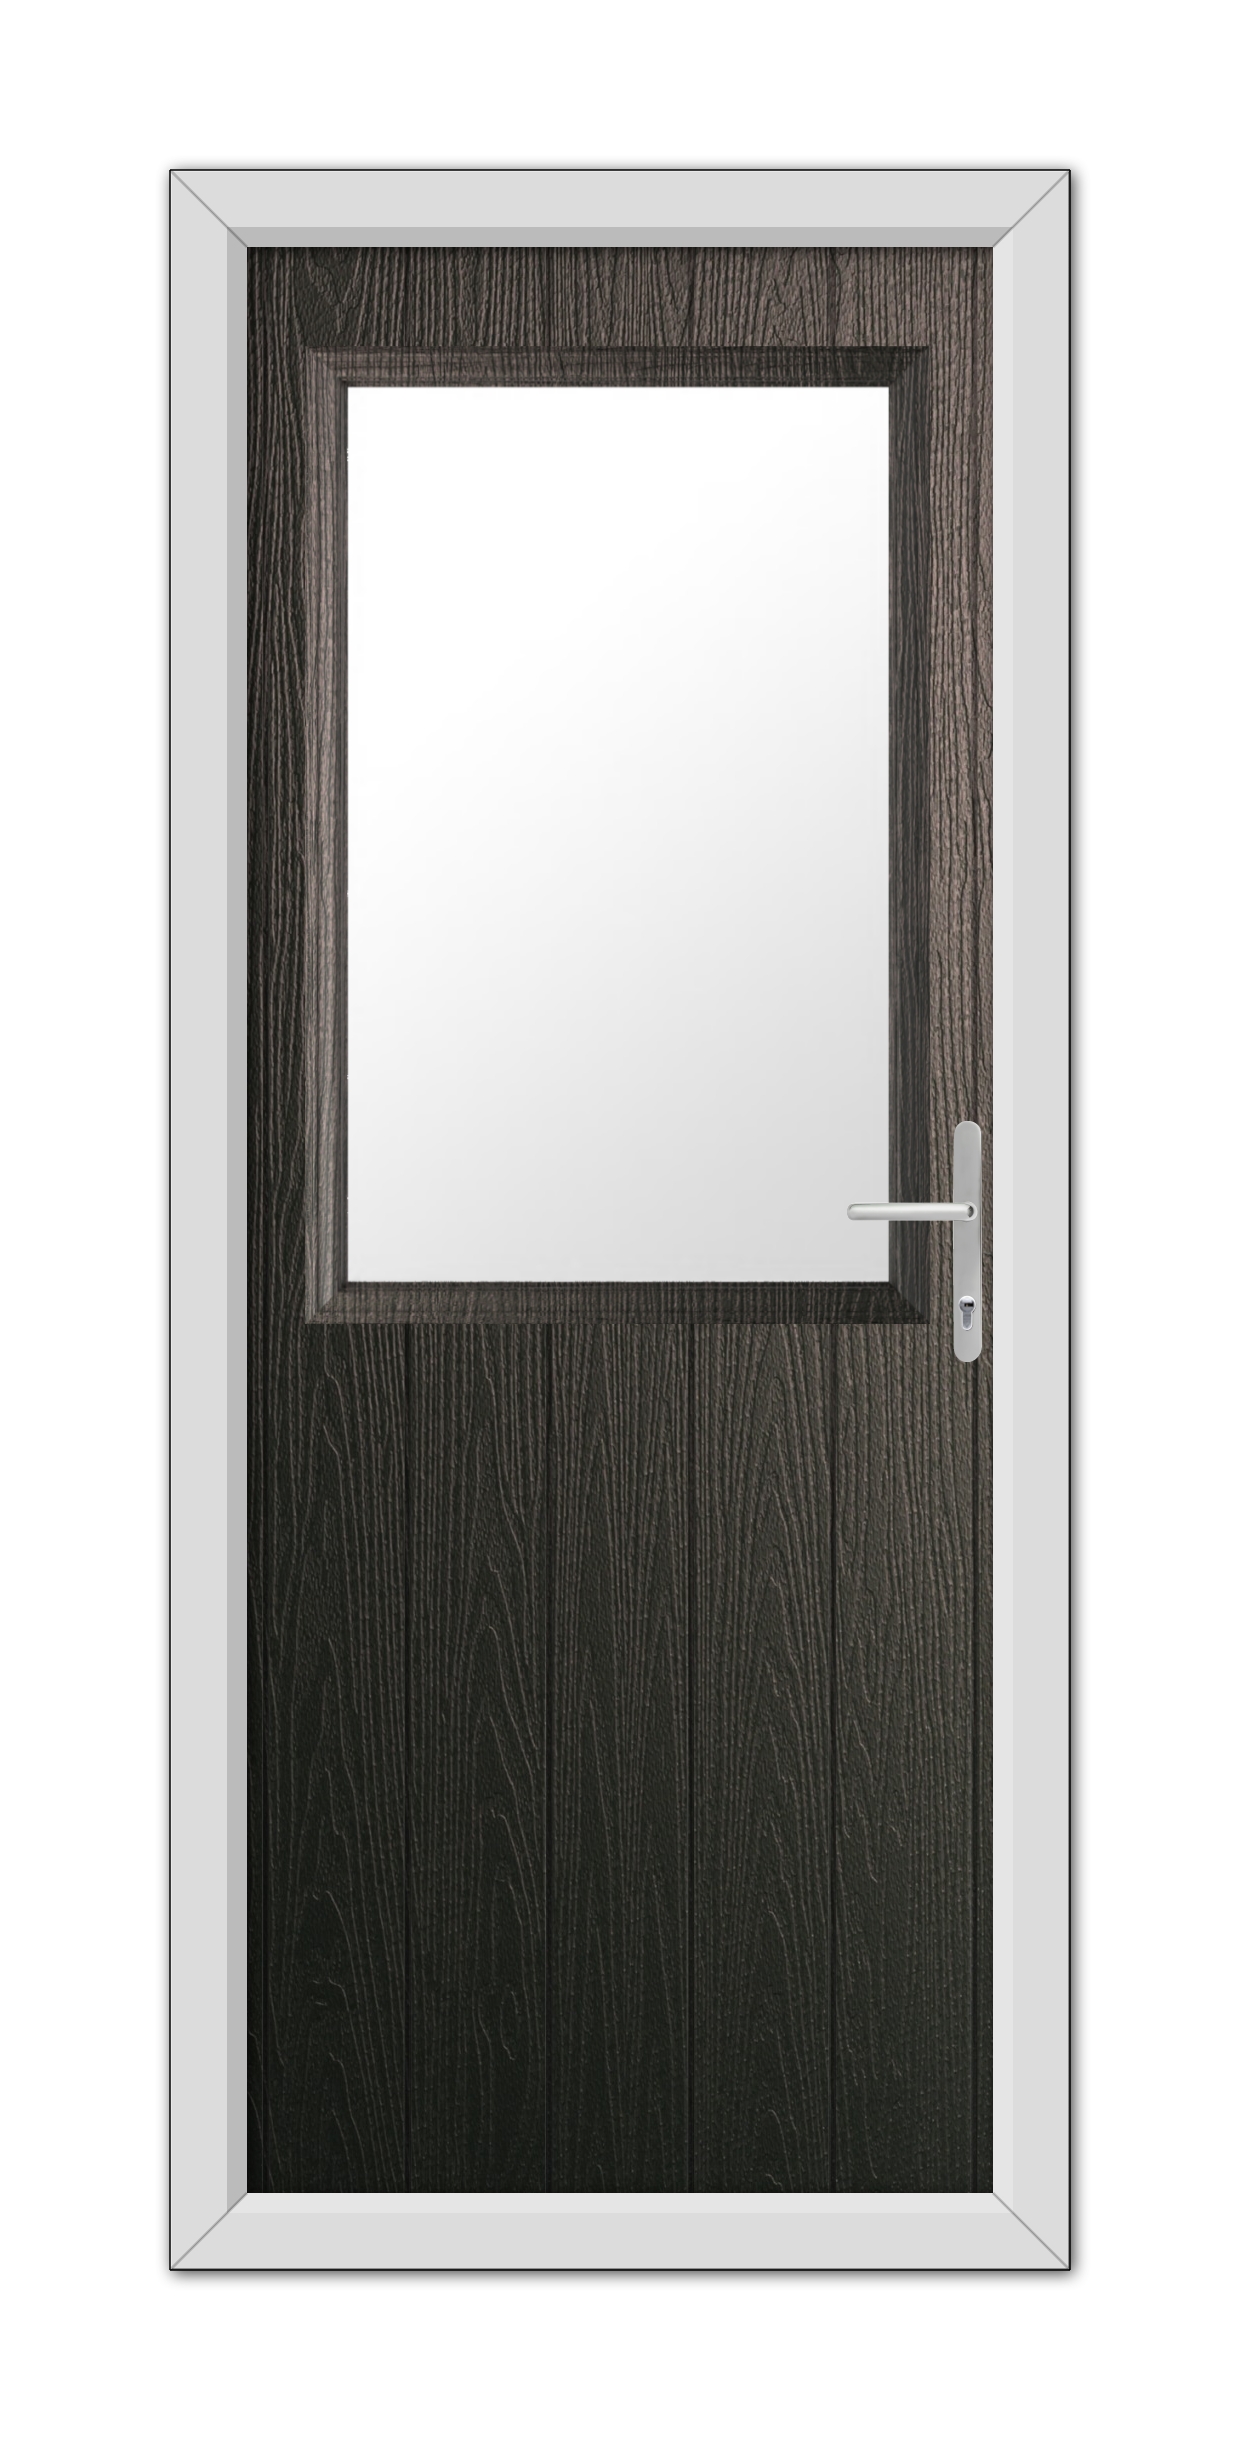 A modern Schwarzbraun Clifton Composite Door 48mm Timber Core with a white frame, featuring a square glass window and a silver handle, isolated on a white background.